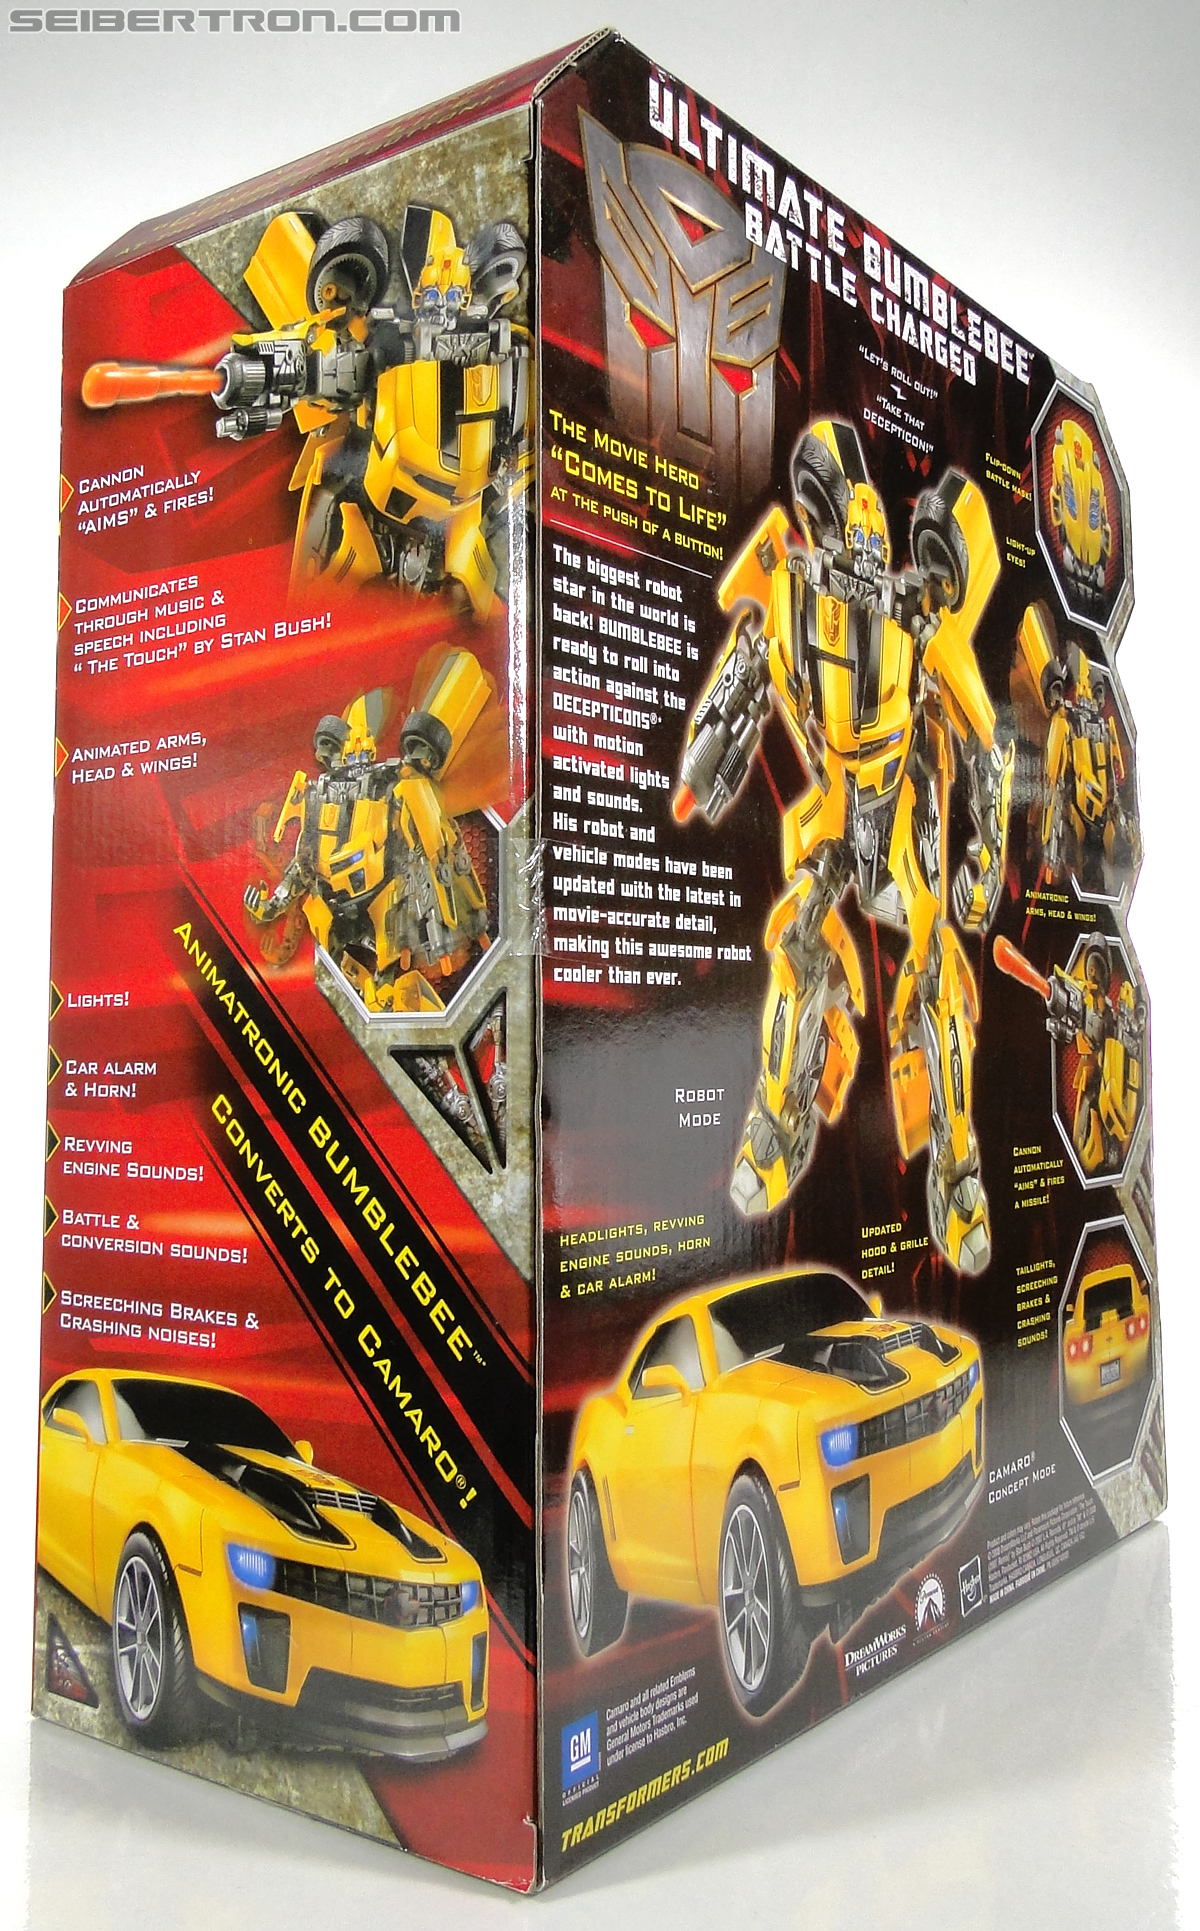 https://static.seibertron.com/images/toys/files/65/ultimate-bumblebee-018.jpg